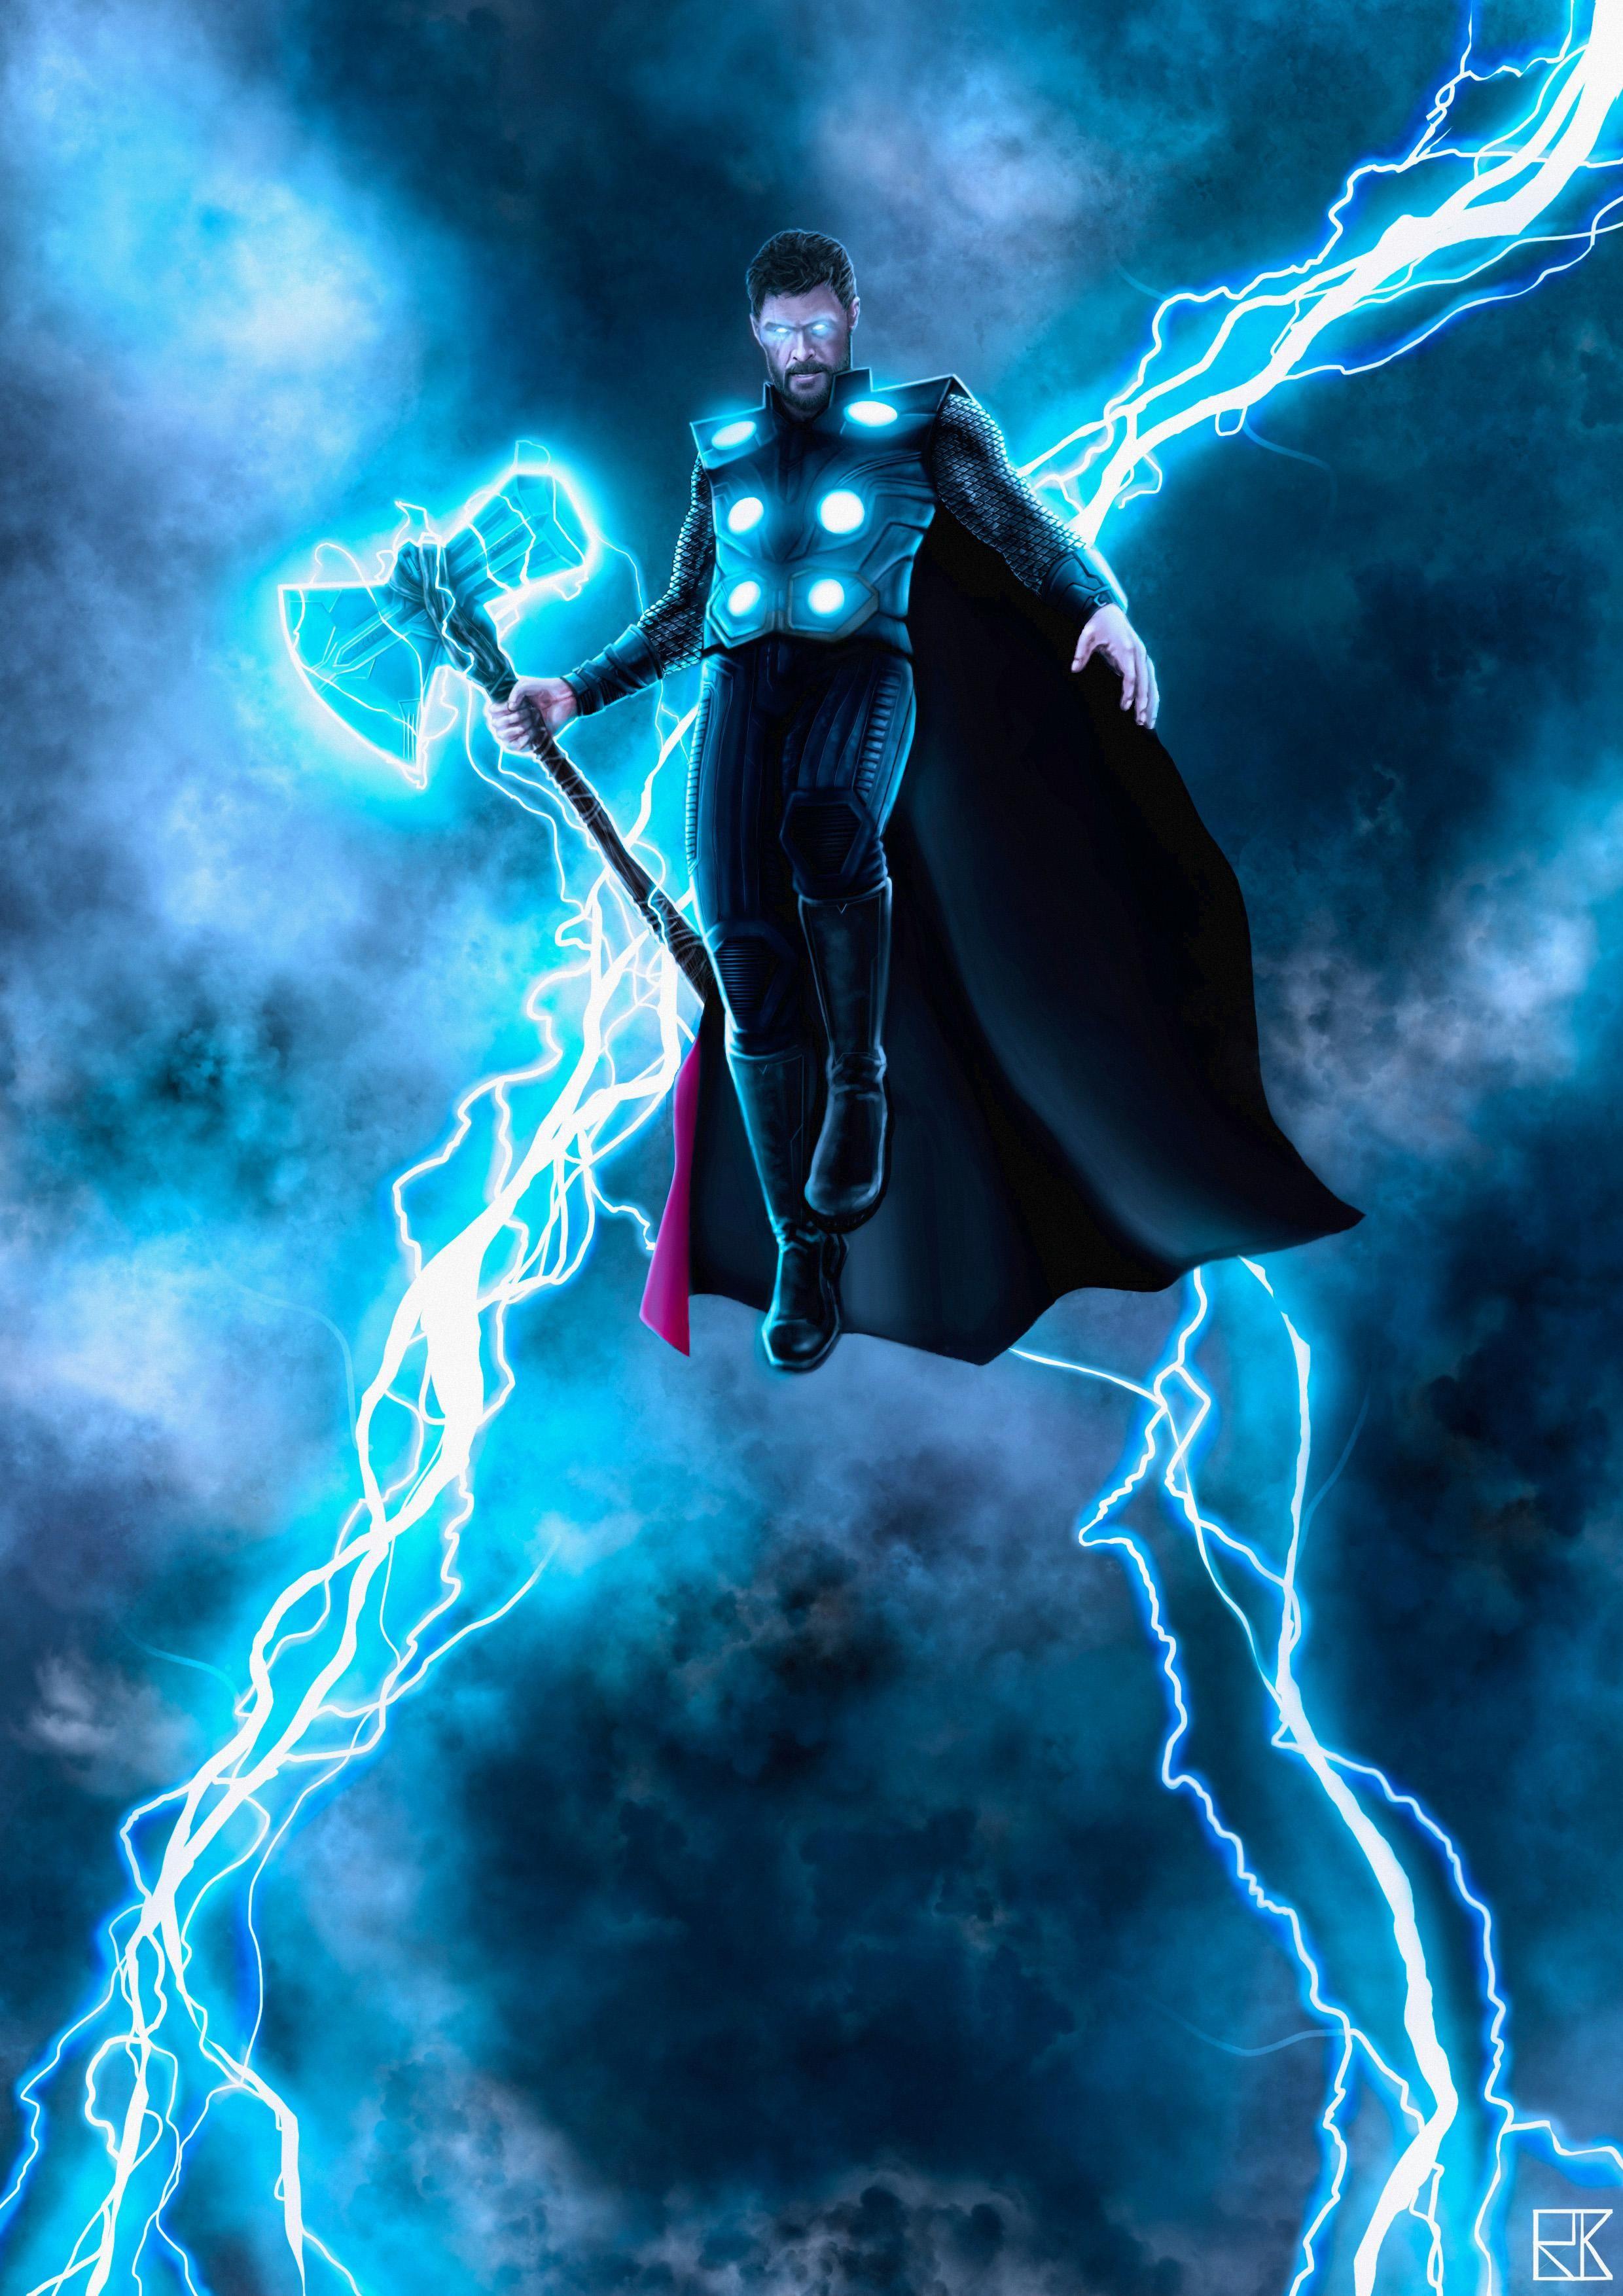 Download Thor Wallpaper, HD Backgrounds Download - itl.cat